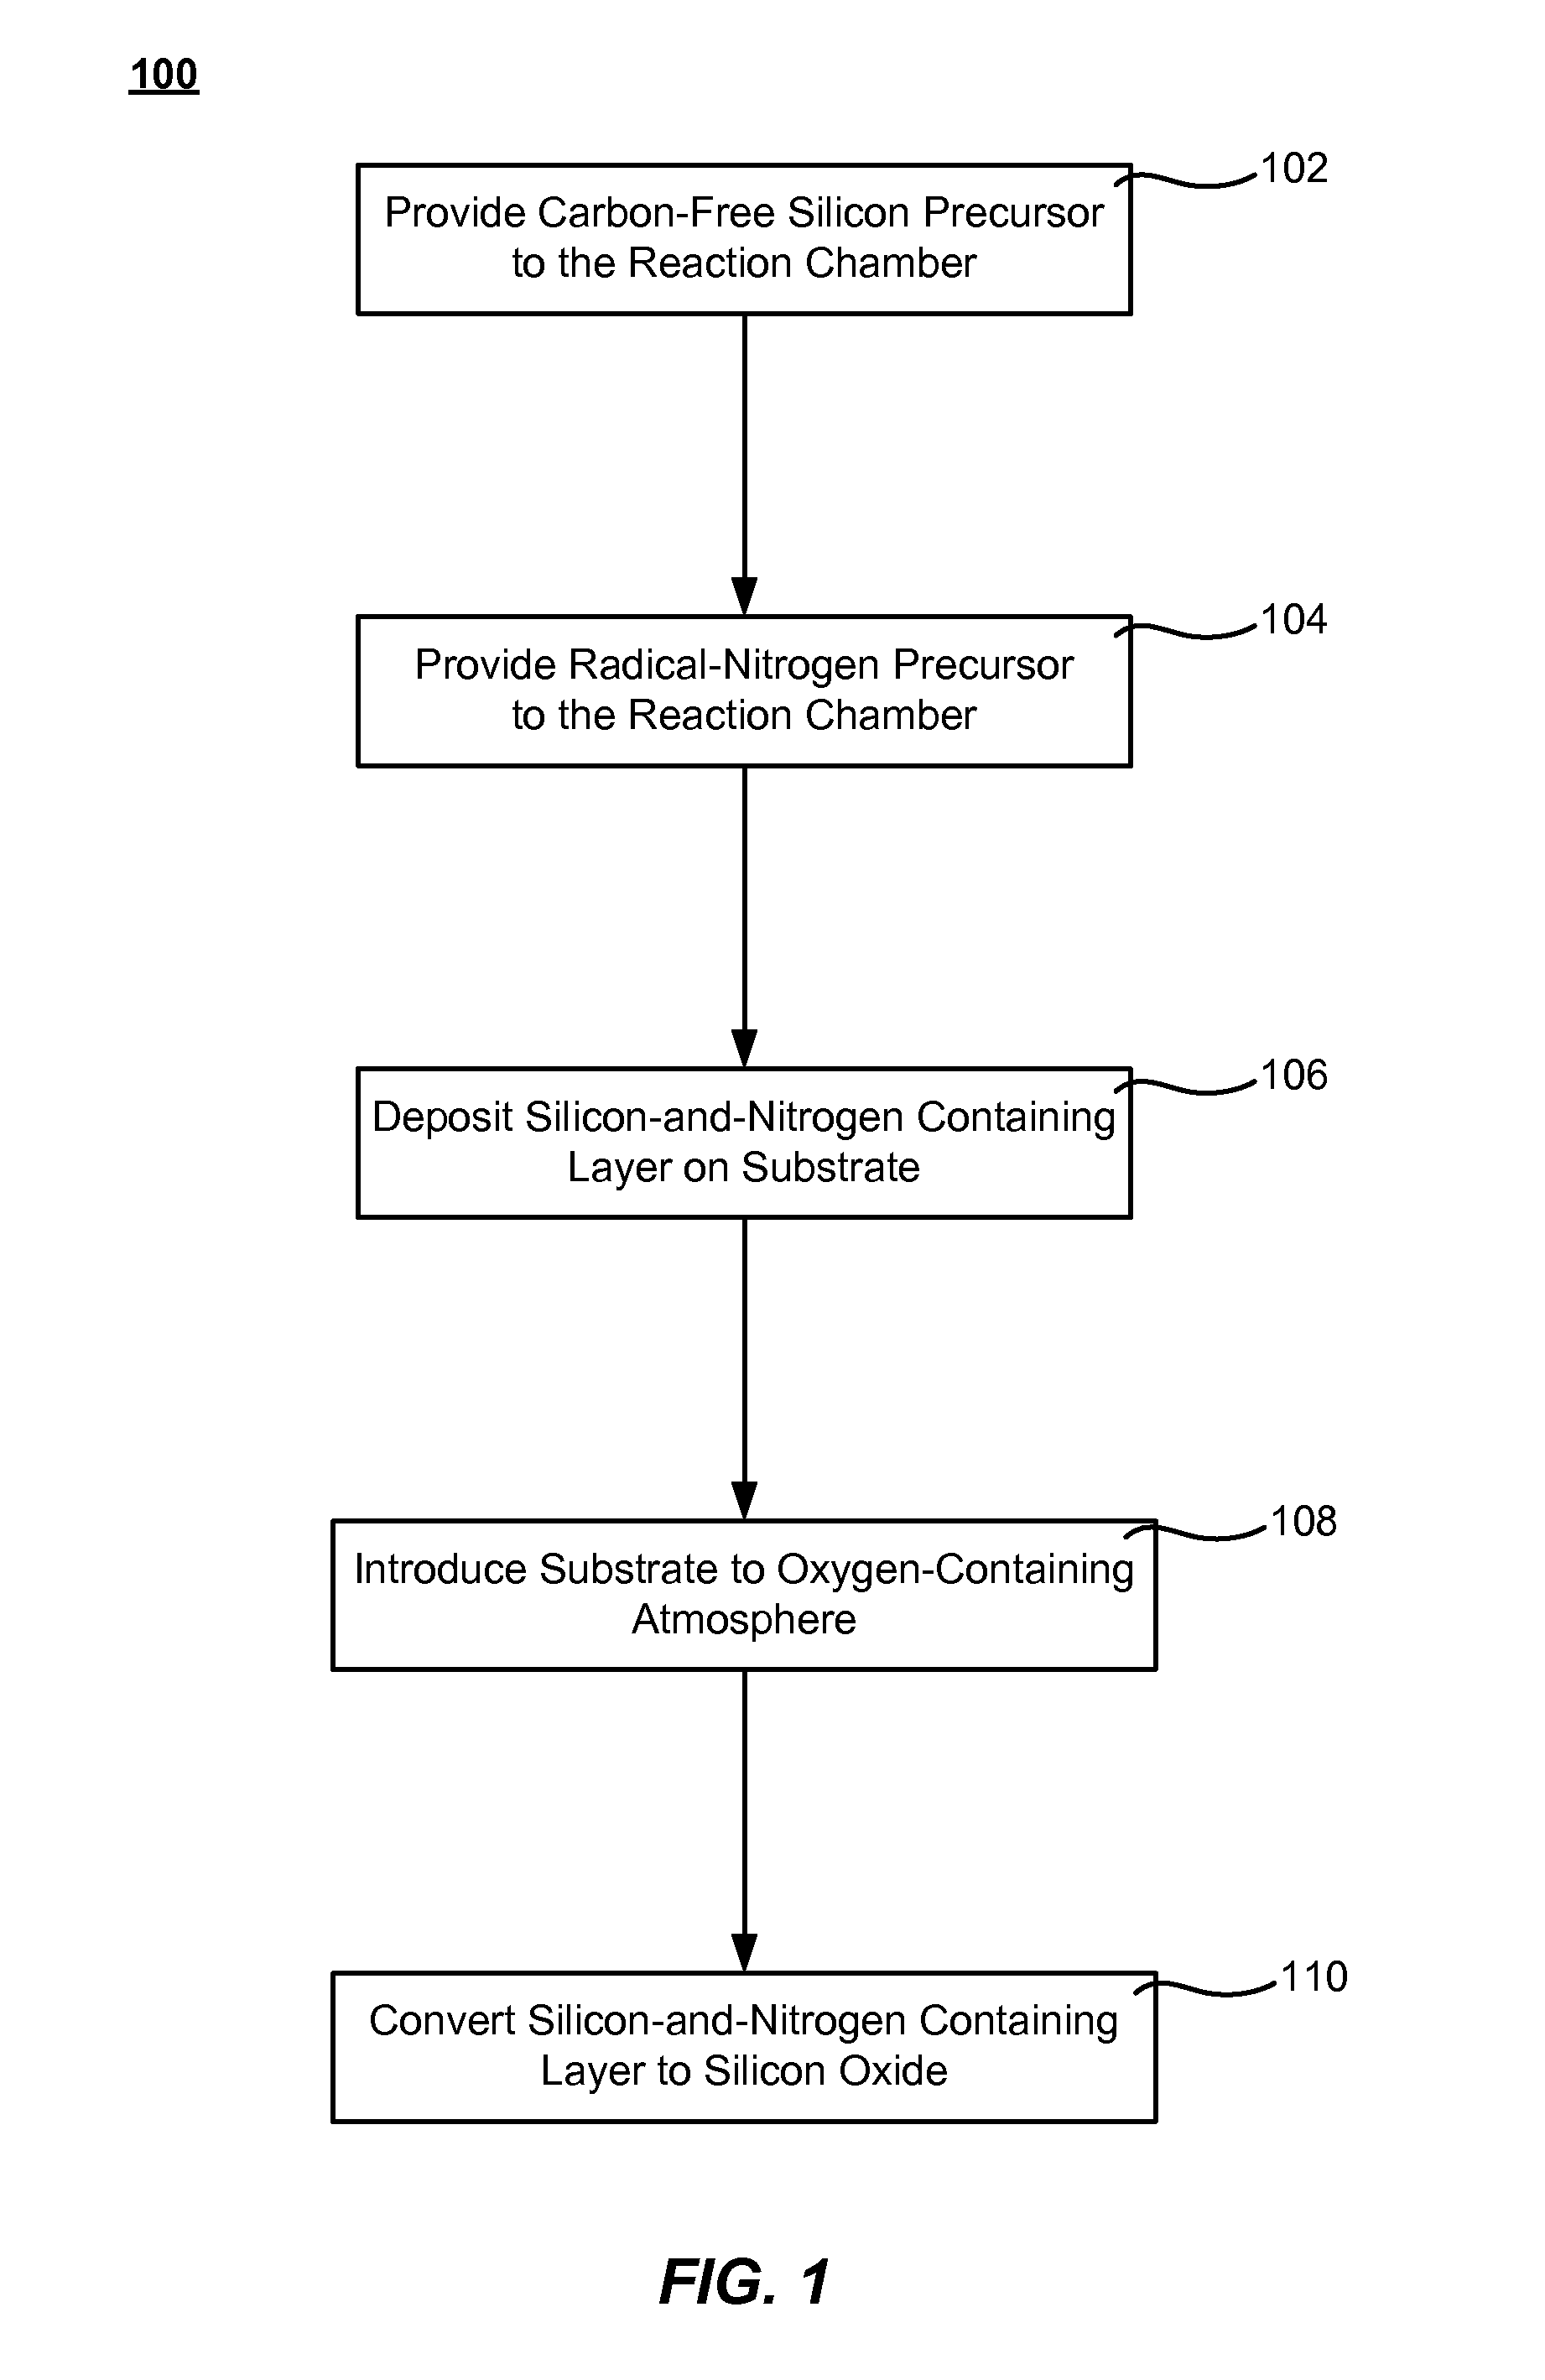 Formation of silicon oxide using non-carbon flowable CVD processes